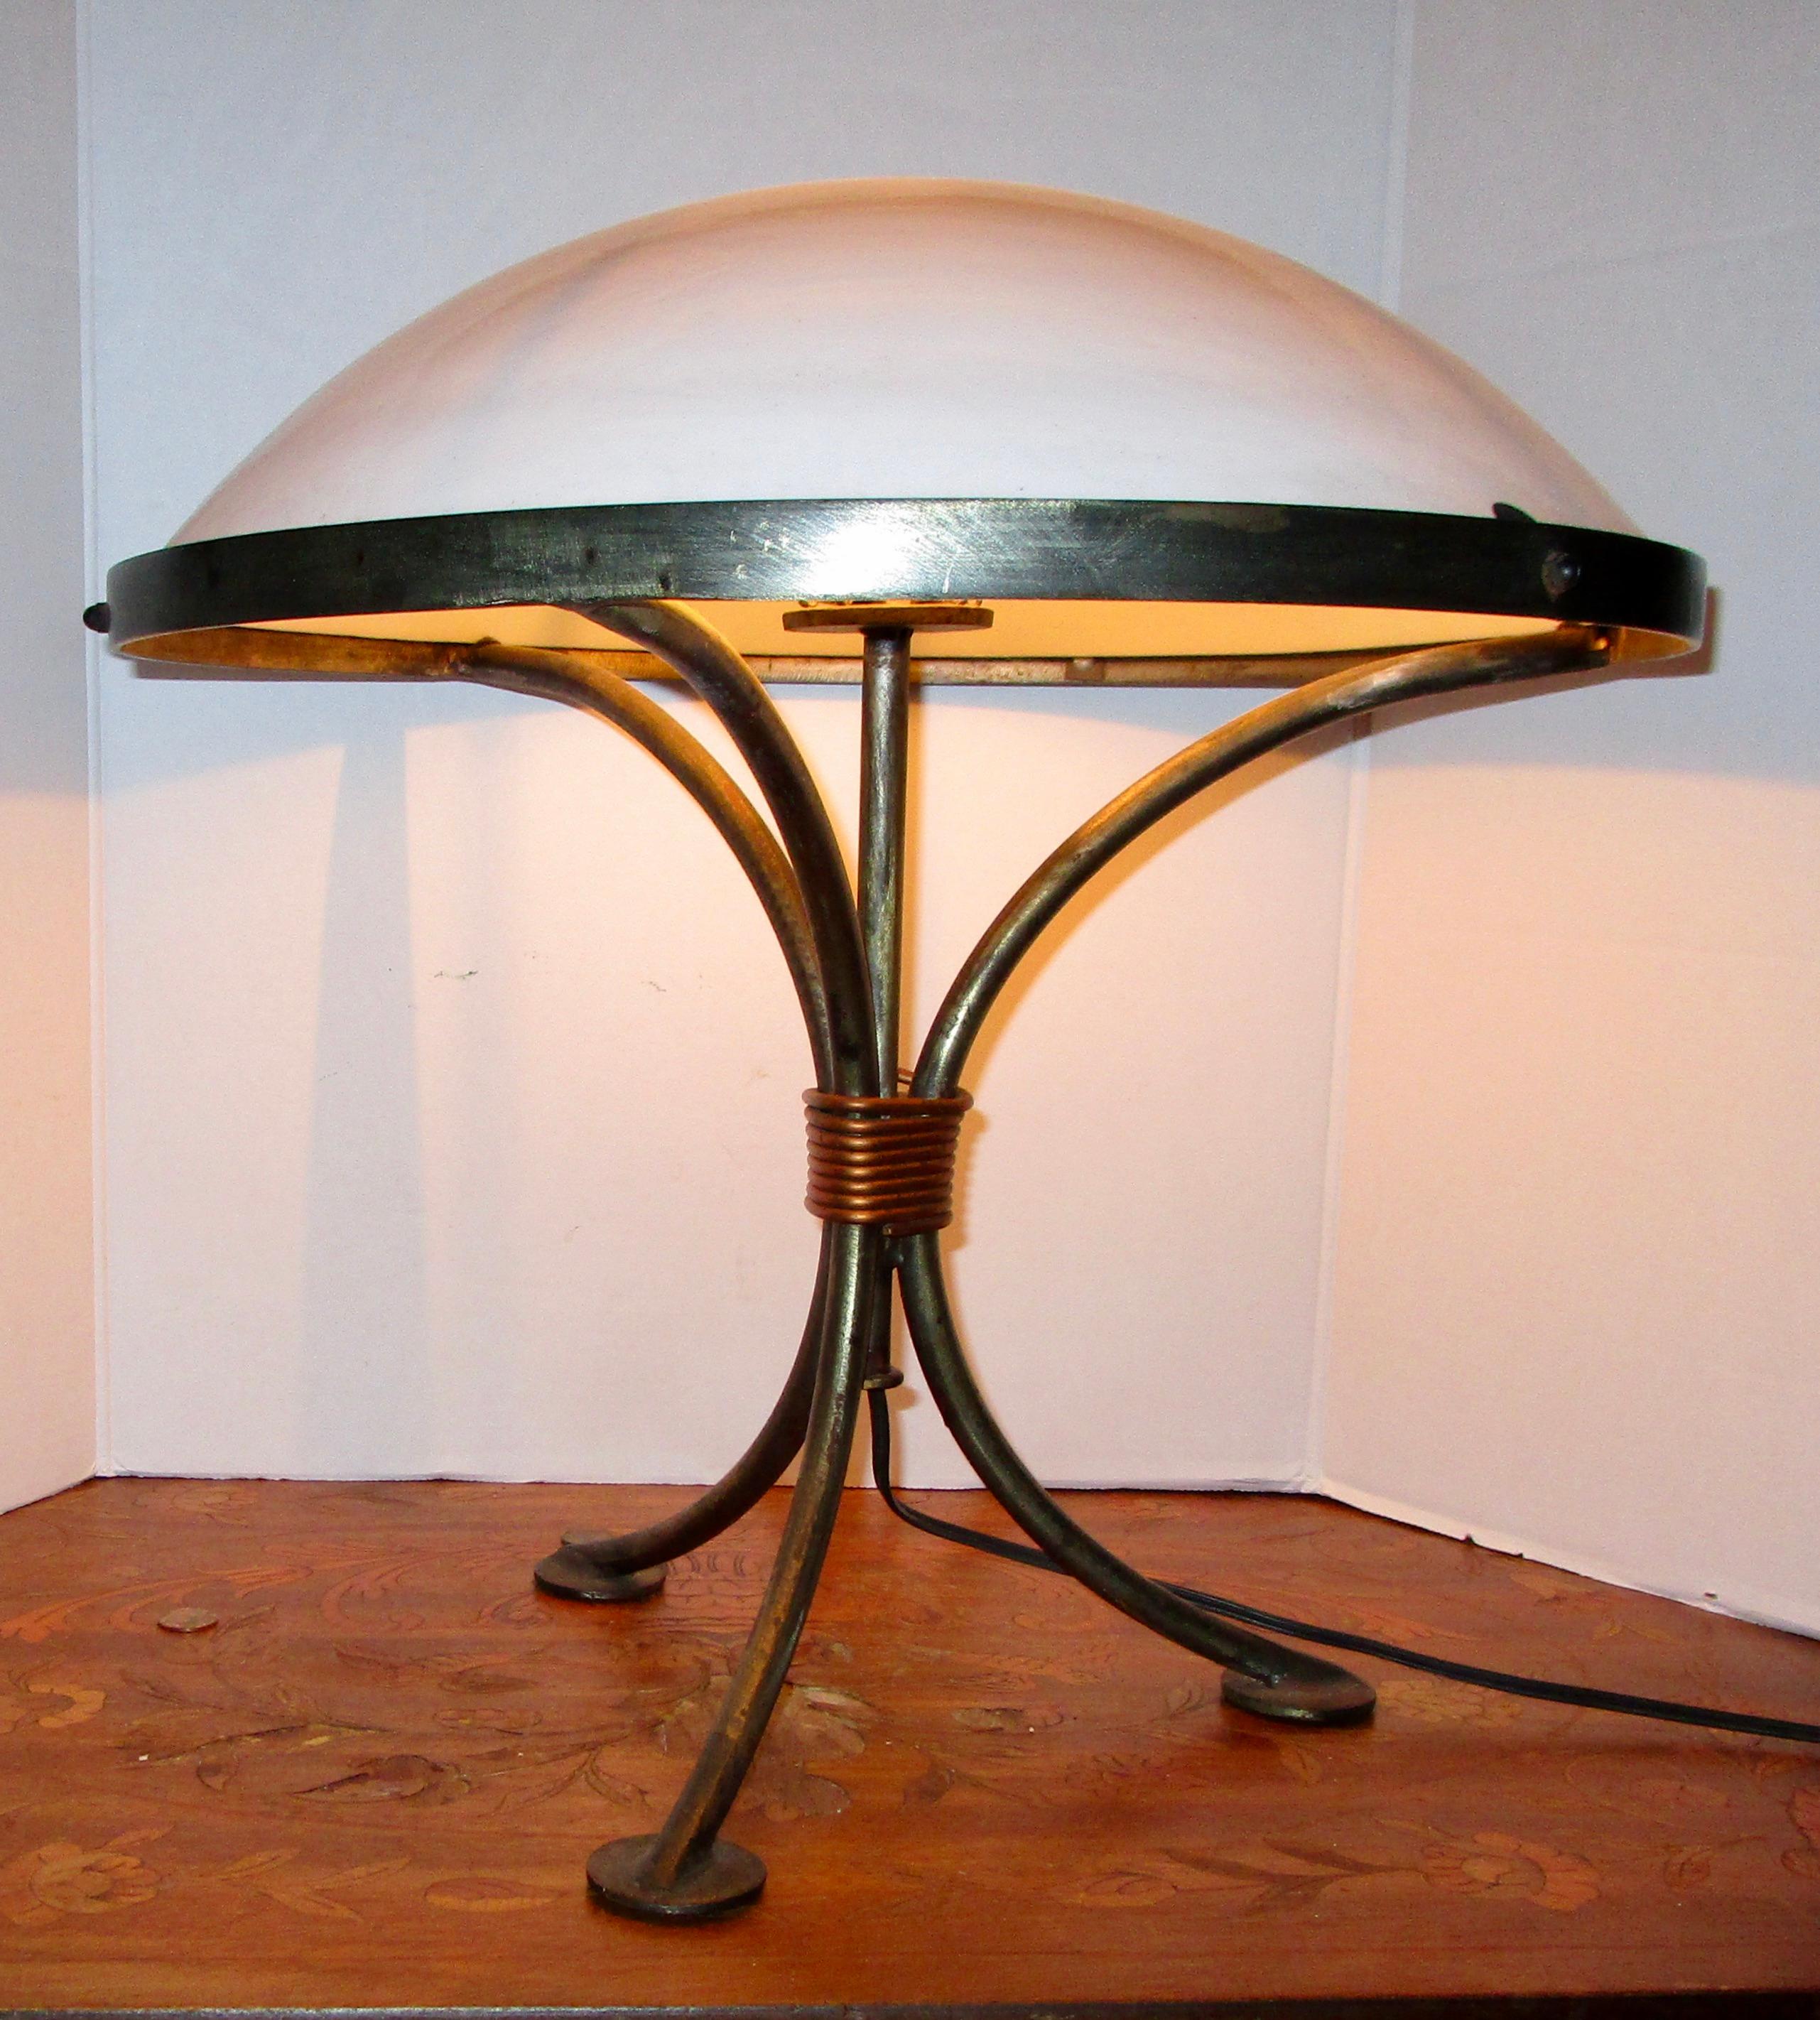 20th Century Domed Opaline Glass Shade Iron Tripod Table Lamp with Copper Clasp